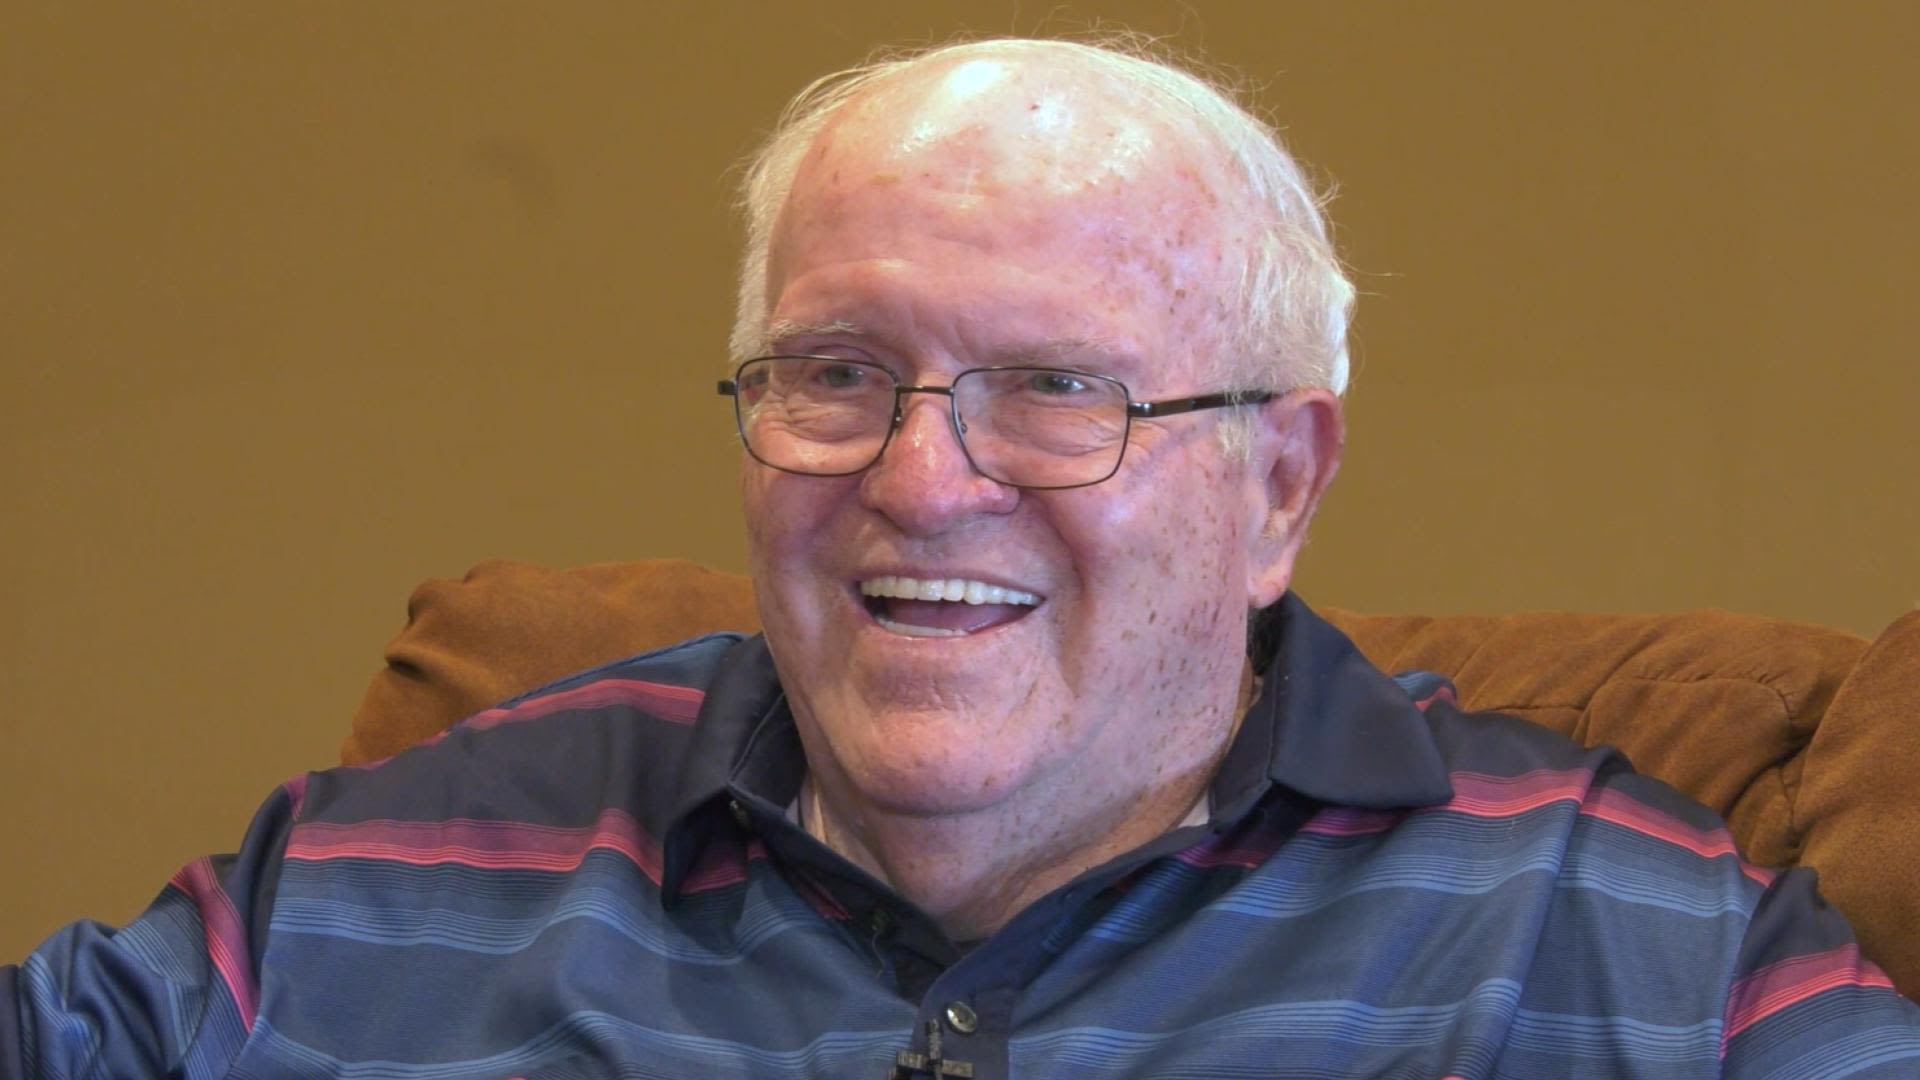 Logan County's Jim Turner retires after 55 years - WNKY News 40 Television